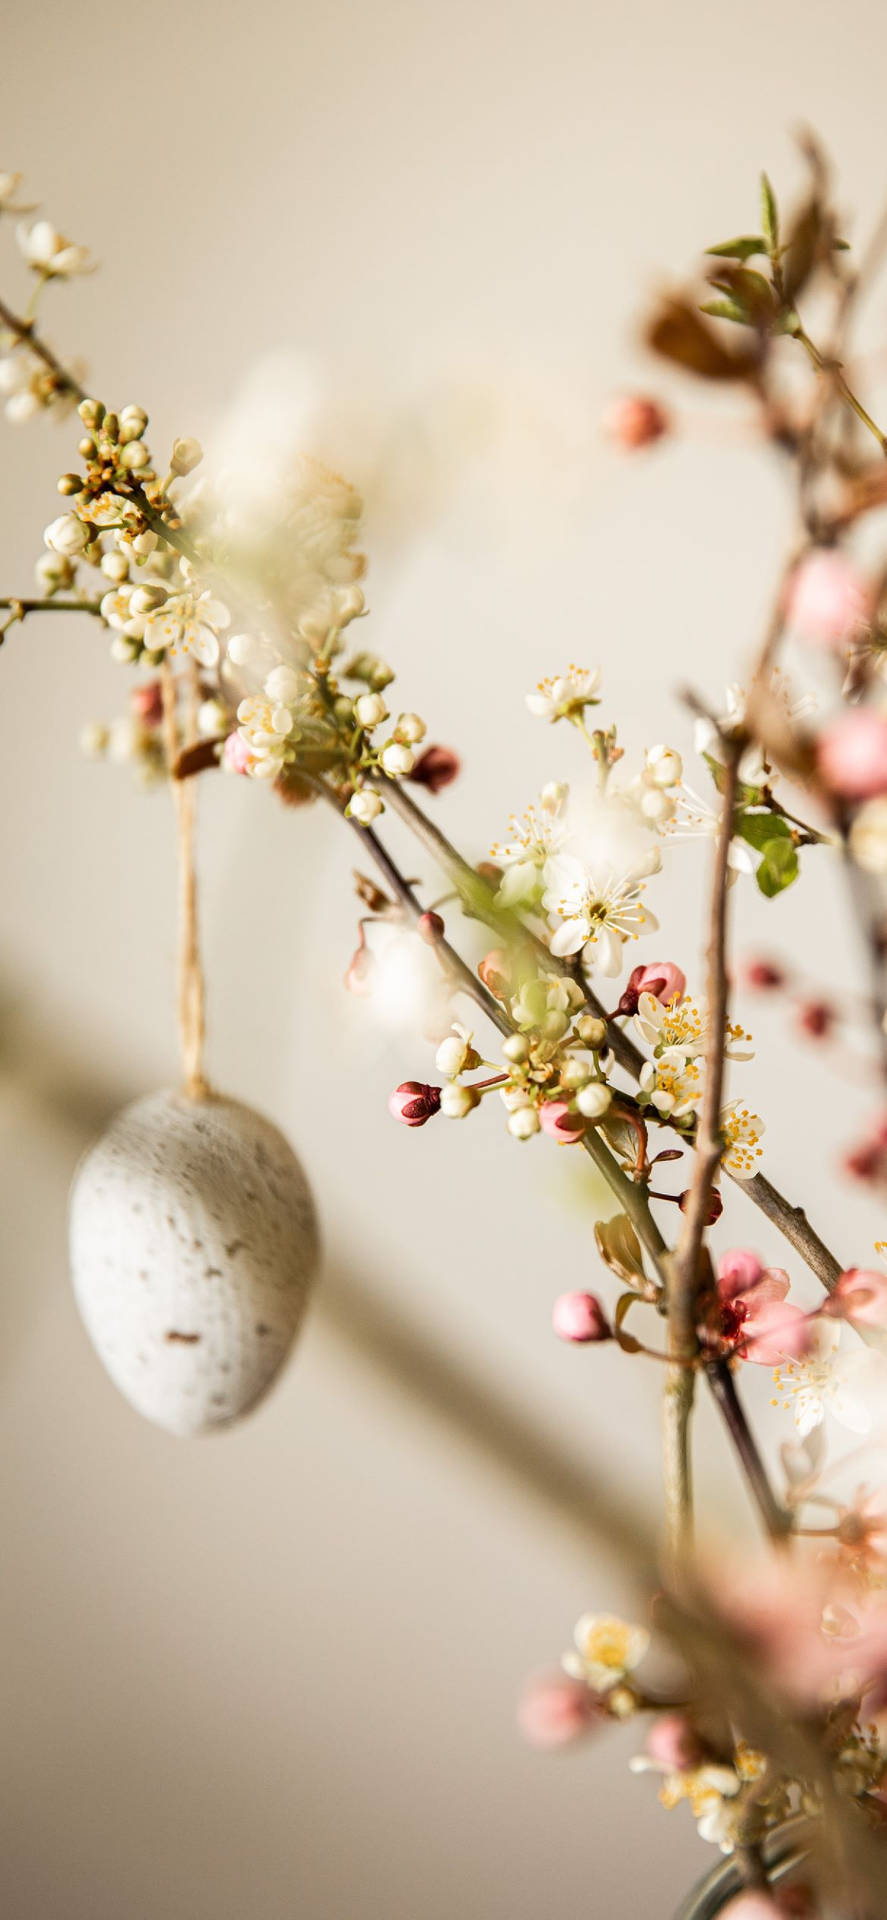 Enjoy tasteful Easter celebrations with chic decorations and pastel colors. Wallpaper